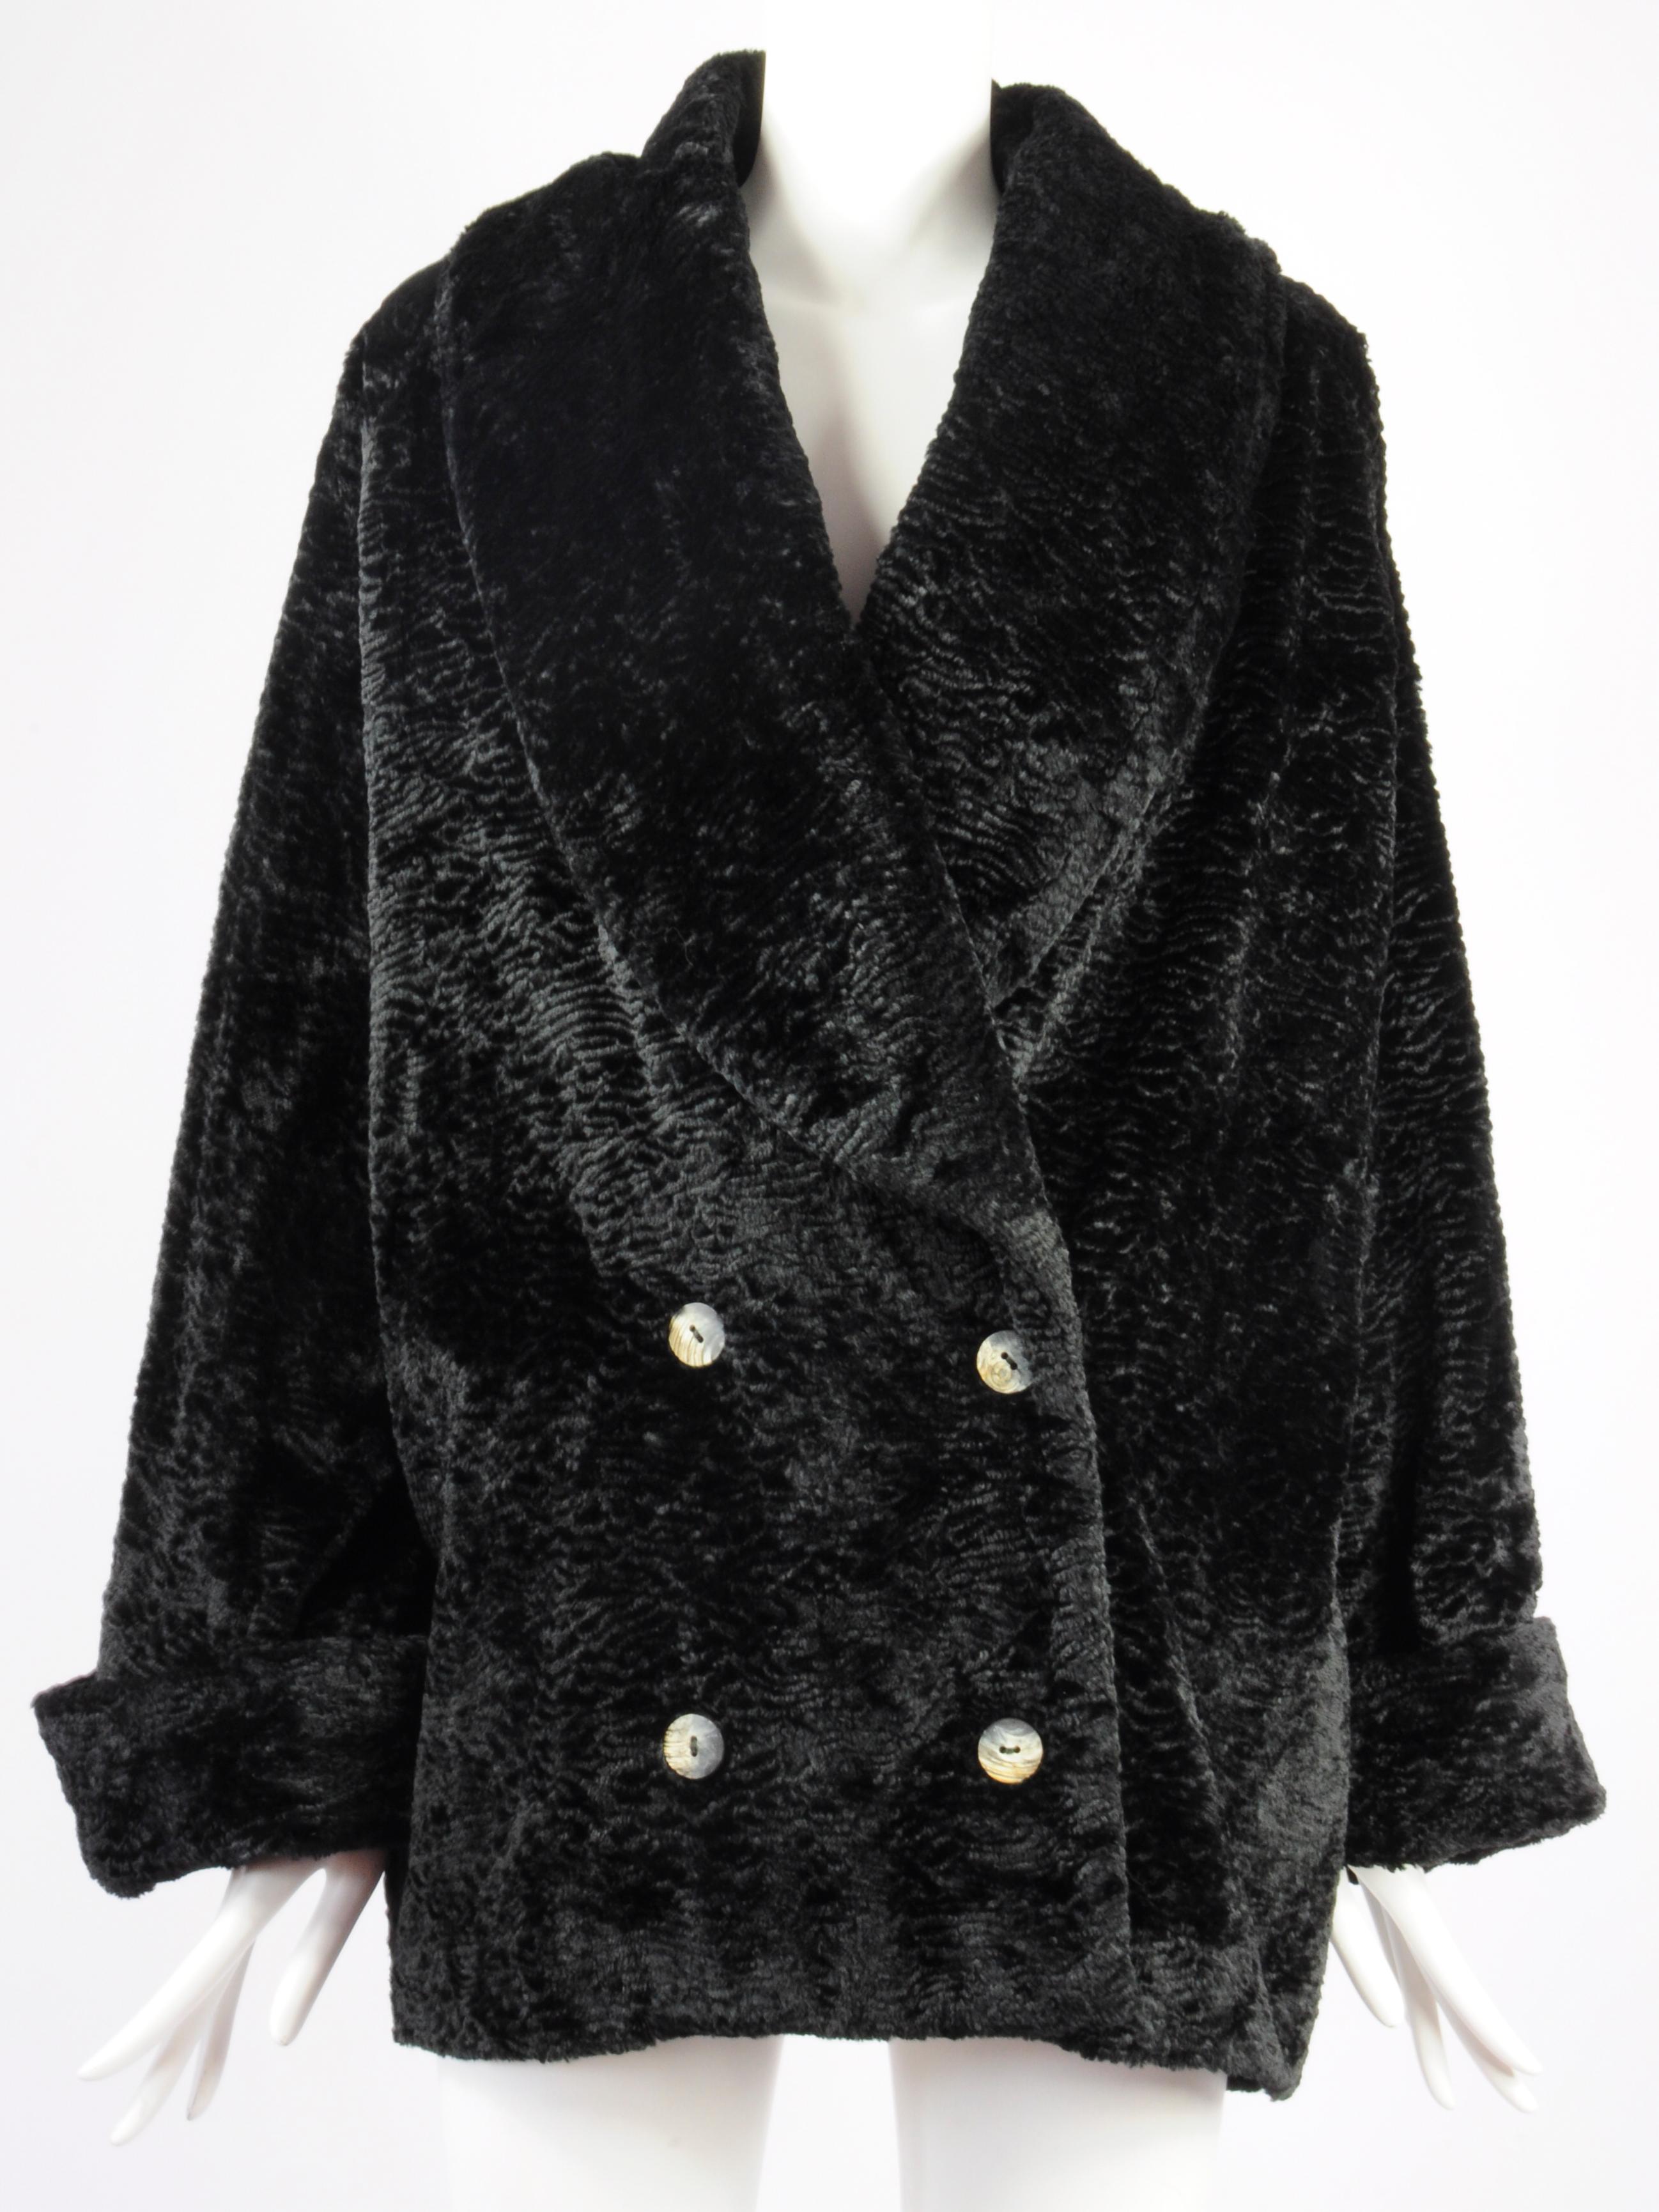 Oliver by Valentino faux fur astrakan stule coat, double breasted with shawl collar from the 1990s. Gorgeous astrakan fur look Valentino coat but in faux fur instead. The sleeves can be cuffed to your liking so works for both shorter and longer arm